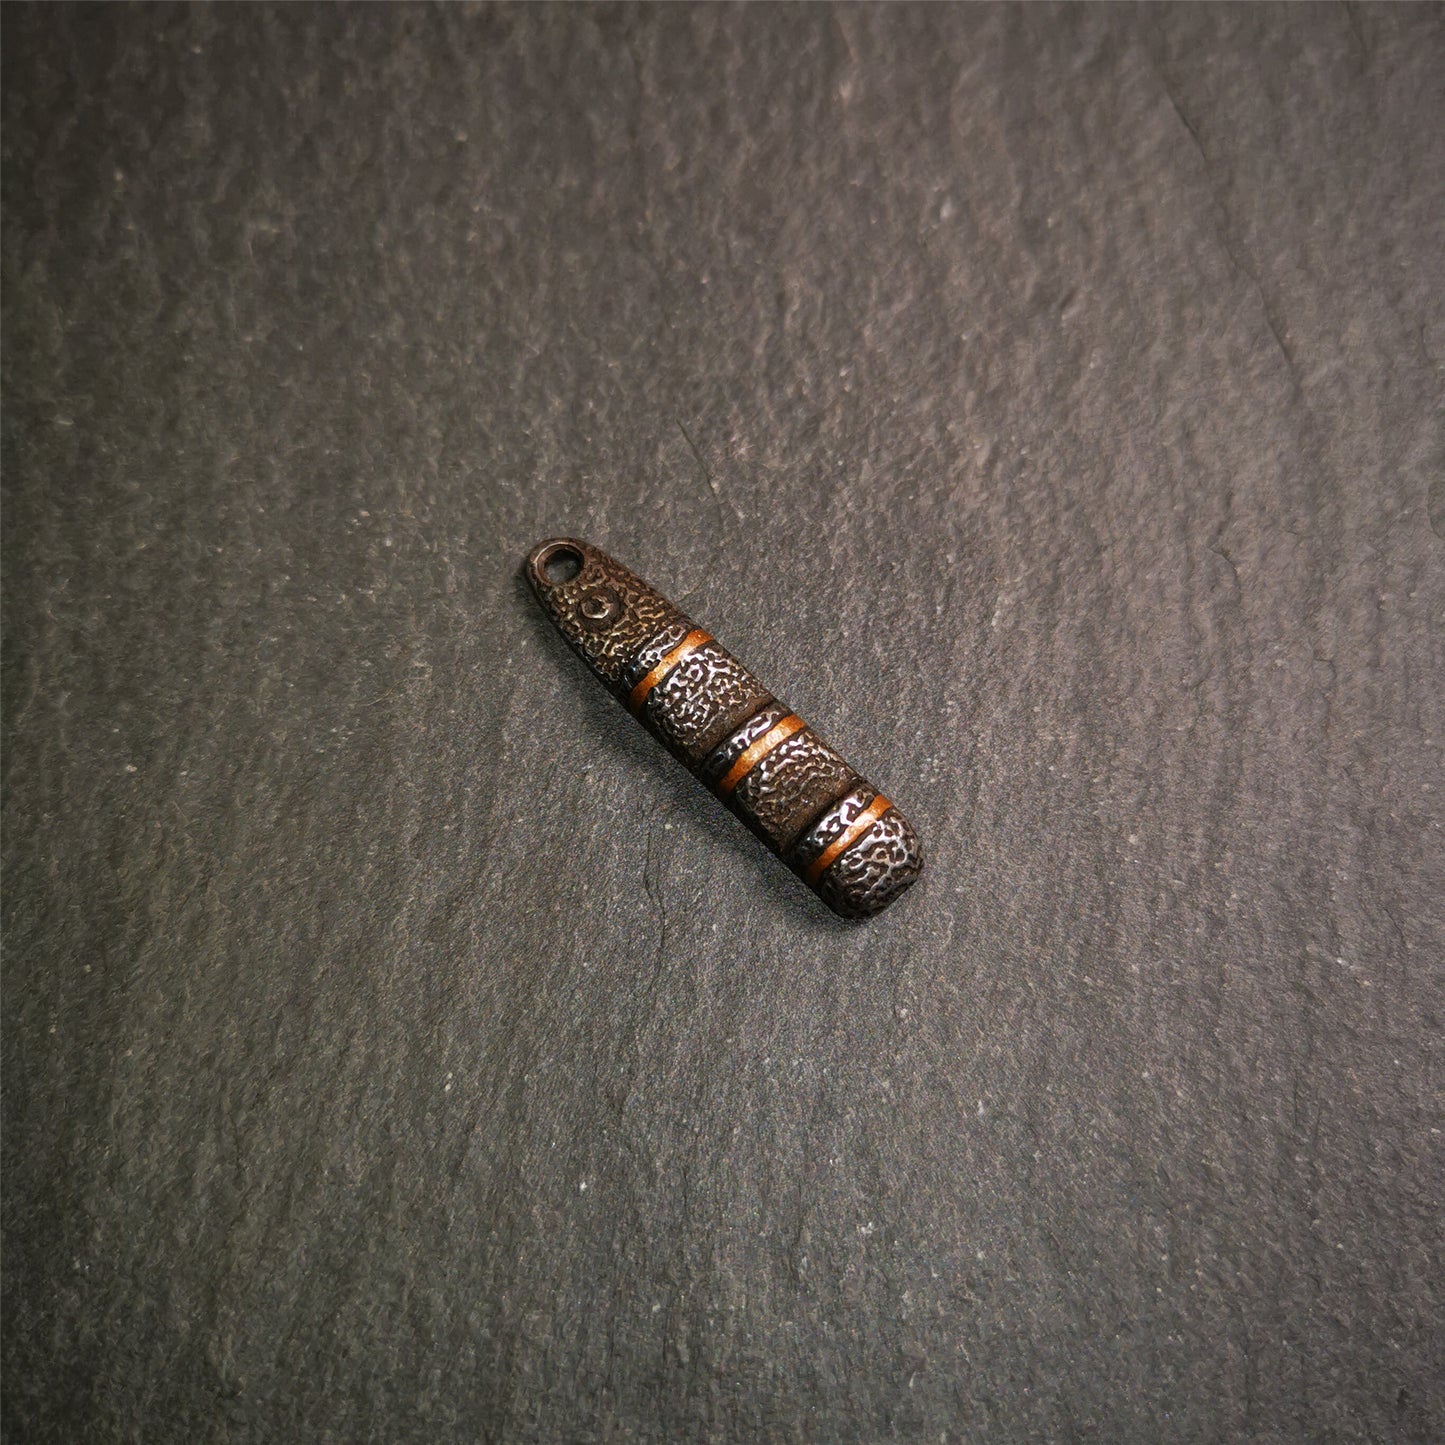 This unique Ladder pendant is made by Tibetan craftsmen. It is made of cold iron and copper, black color,the shape is Tibetan Ladder of Heaven,length is 32mm. You can make it into a pendant,keychain, or just put it on your desk,as an ornament.